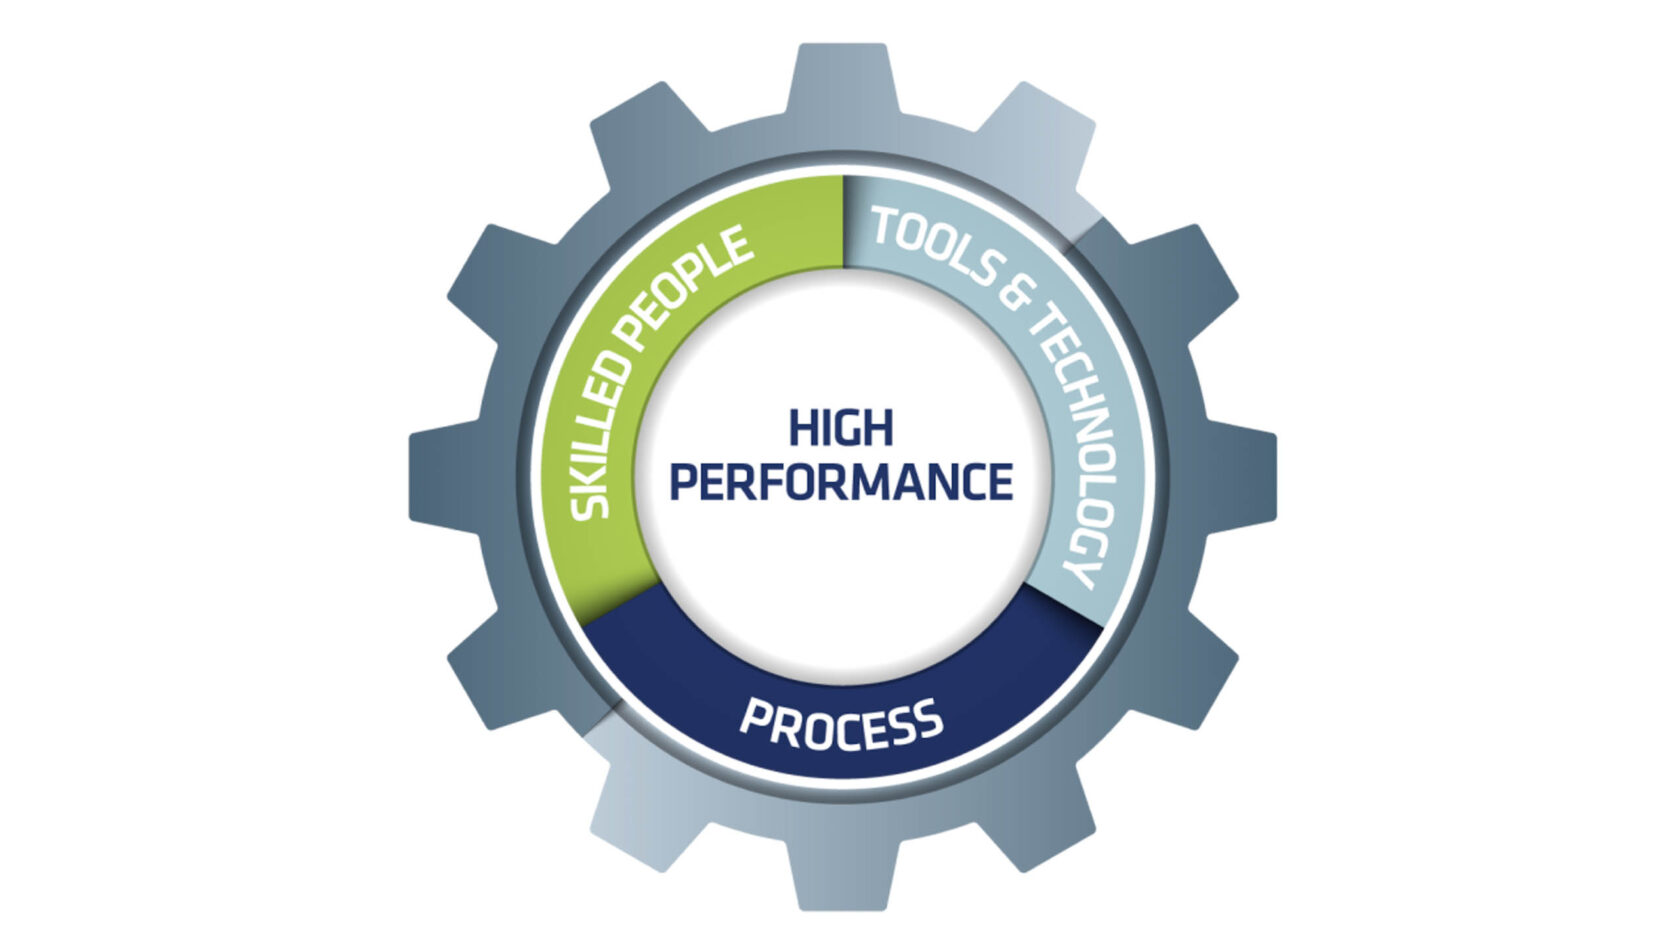 High Performance graphic.